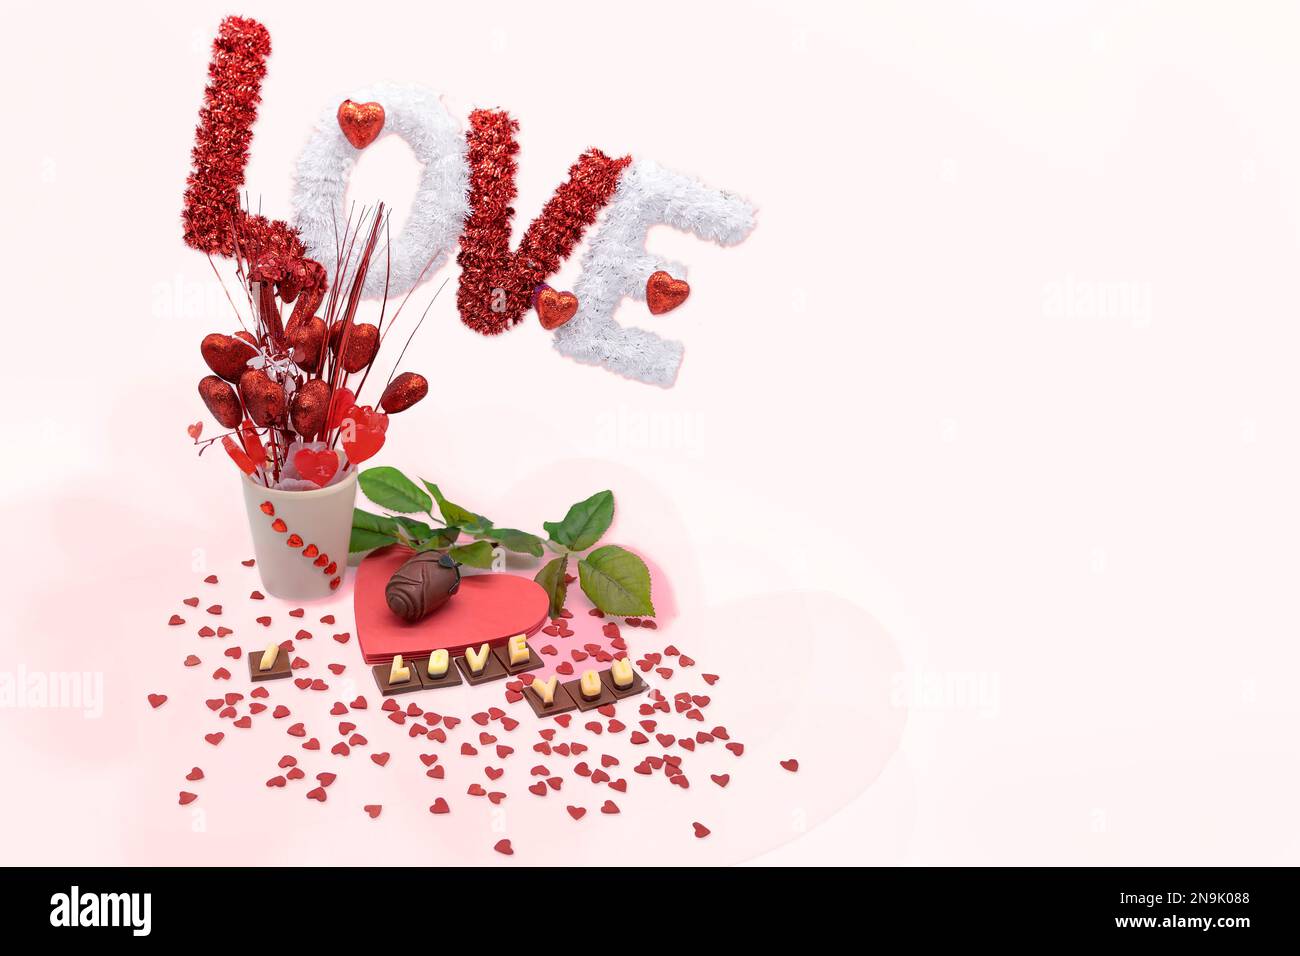 Valentine romatic still life with copy space and can be used as a background Stock Photo